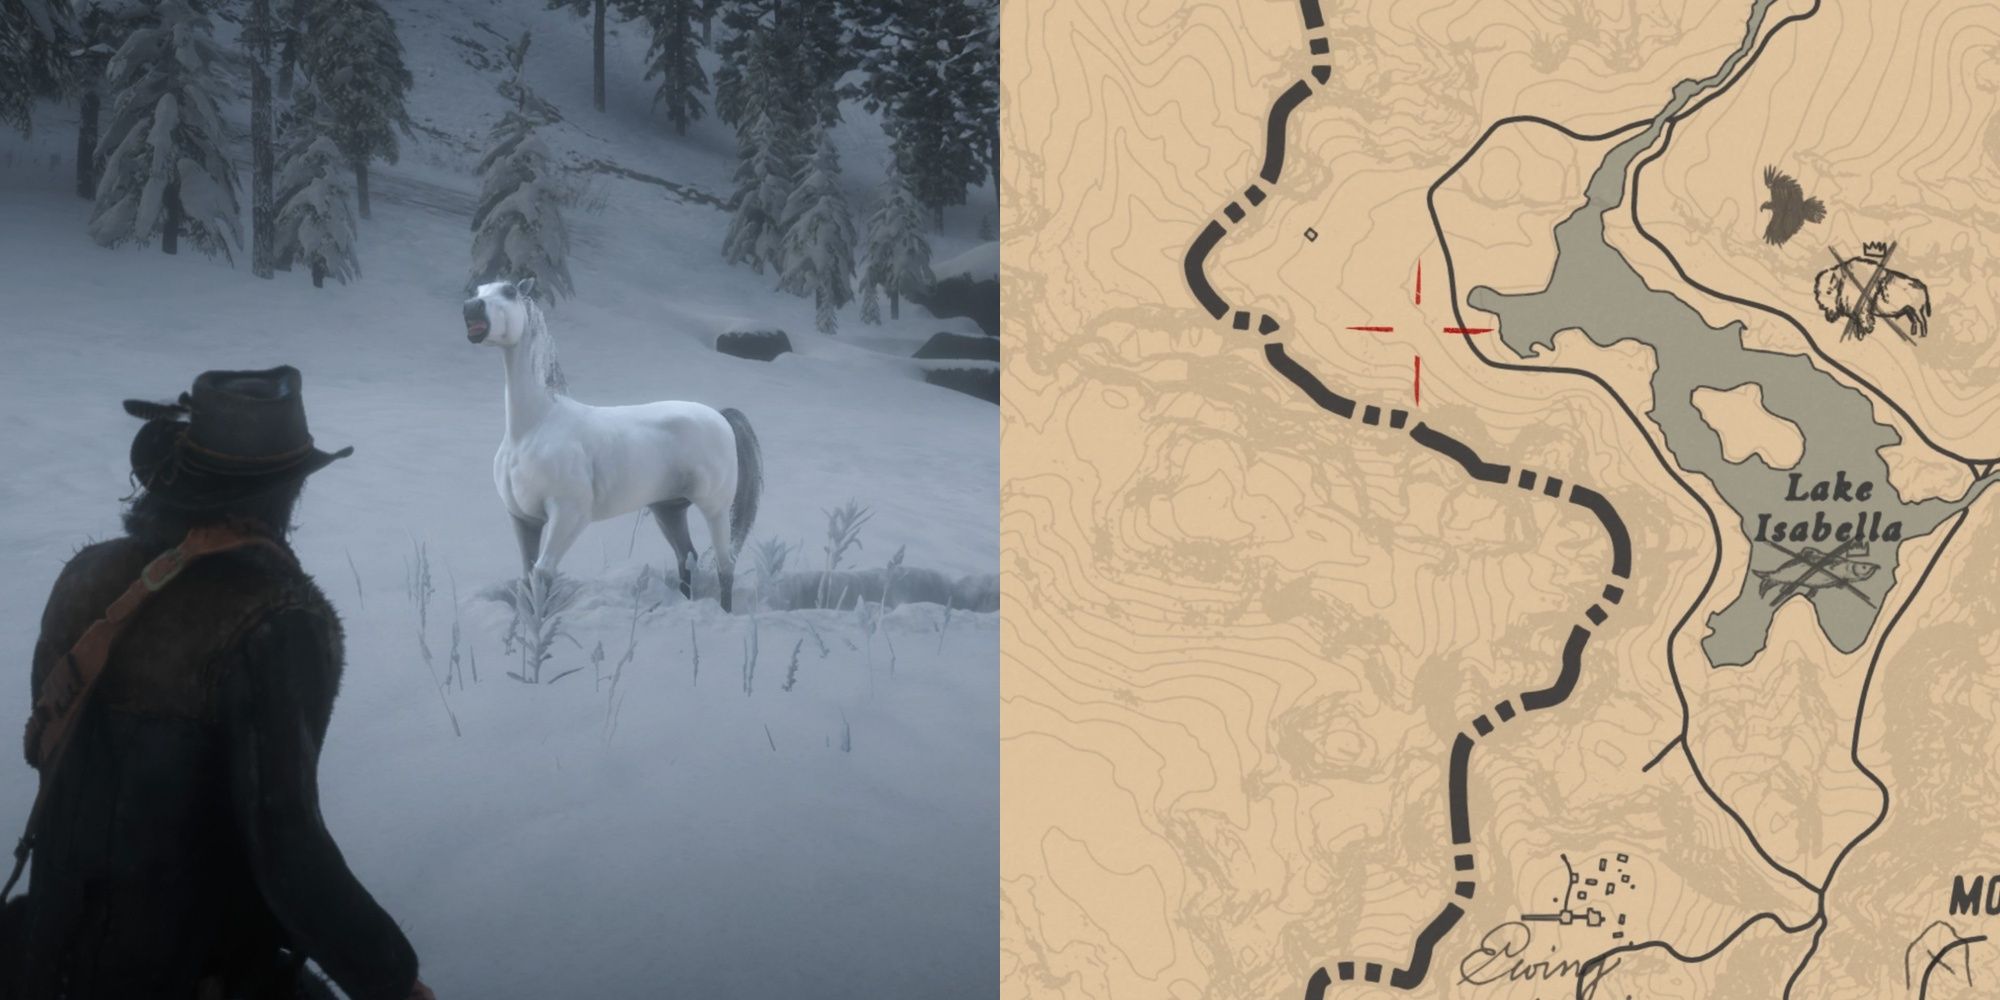 Red Dead Redemption 2 the White Arabian horse being slowly approached in the snow, and the location of the horse by Lake Isabella marked on the in-game map